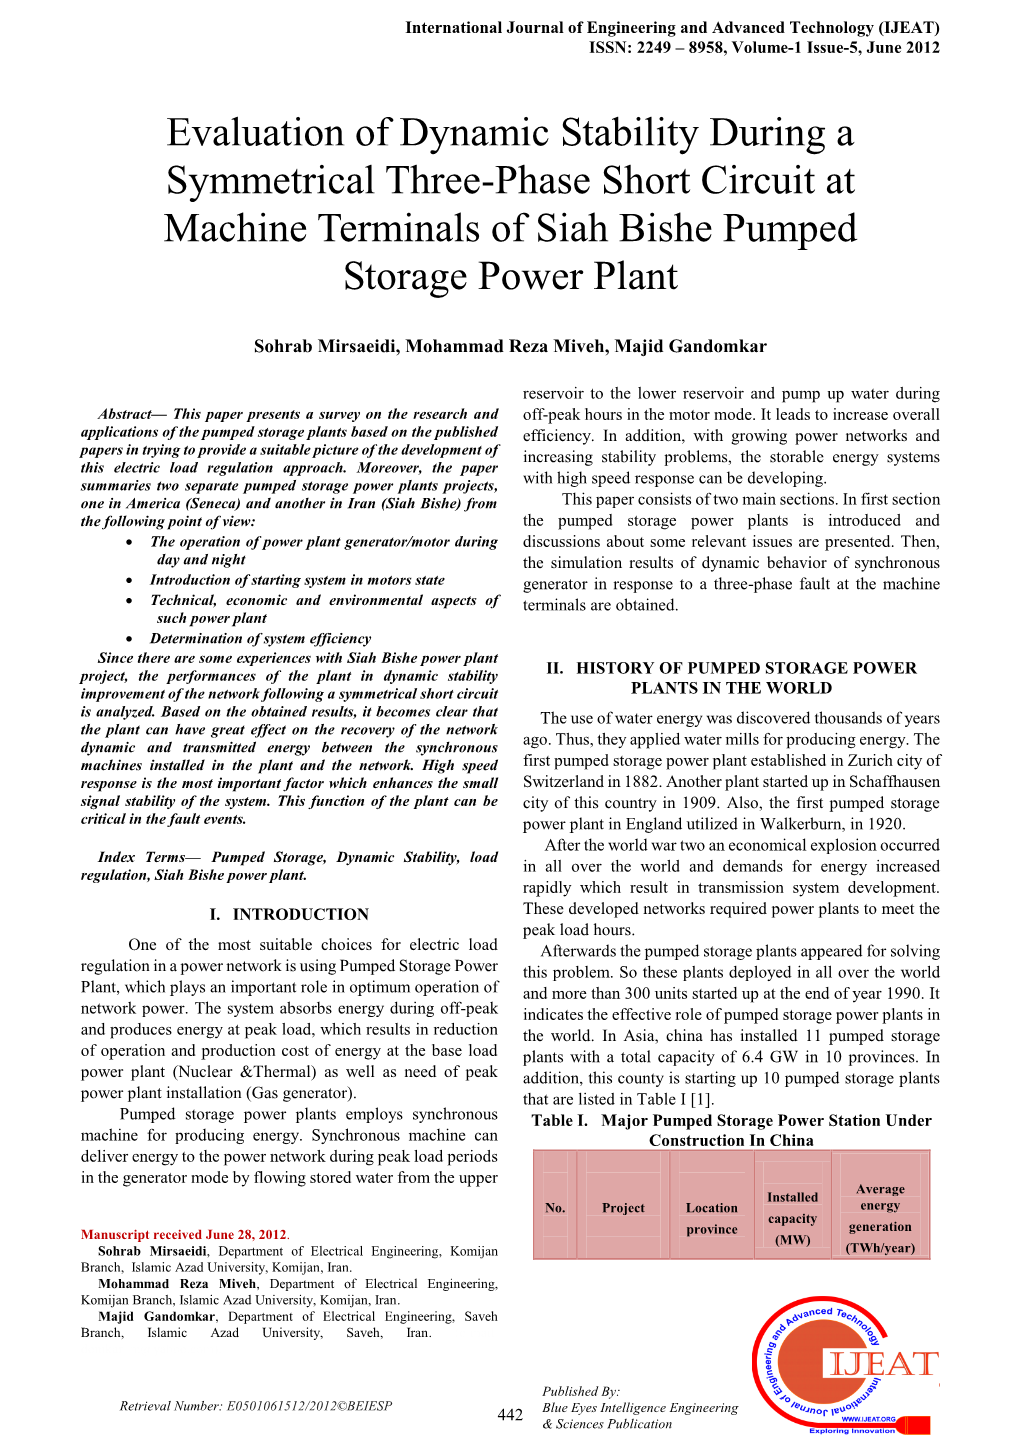 Evaluation of Dynamic Stability During a Symmetrical Three-Phase Short Circuit at Machine Terminals of Siah Bishe Pumped Storage Power Plant